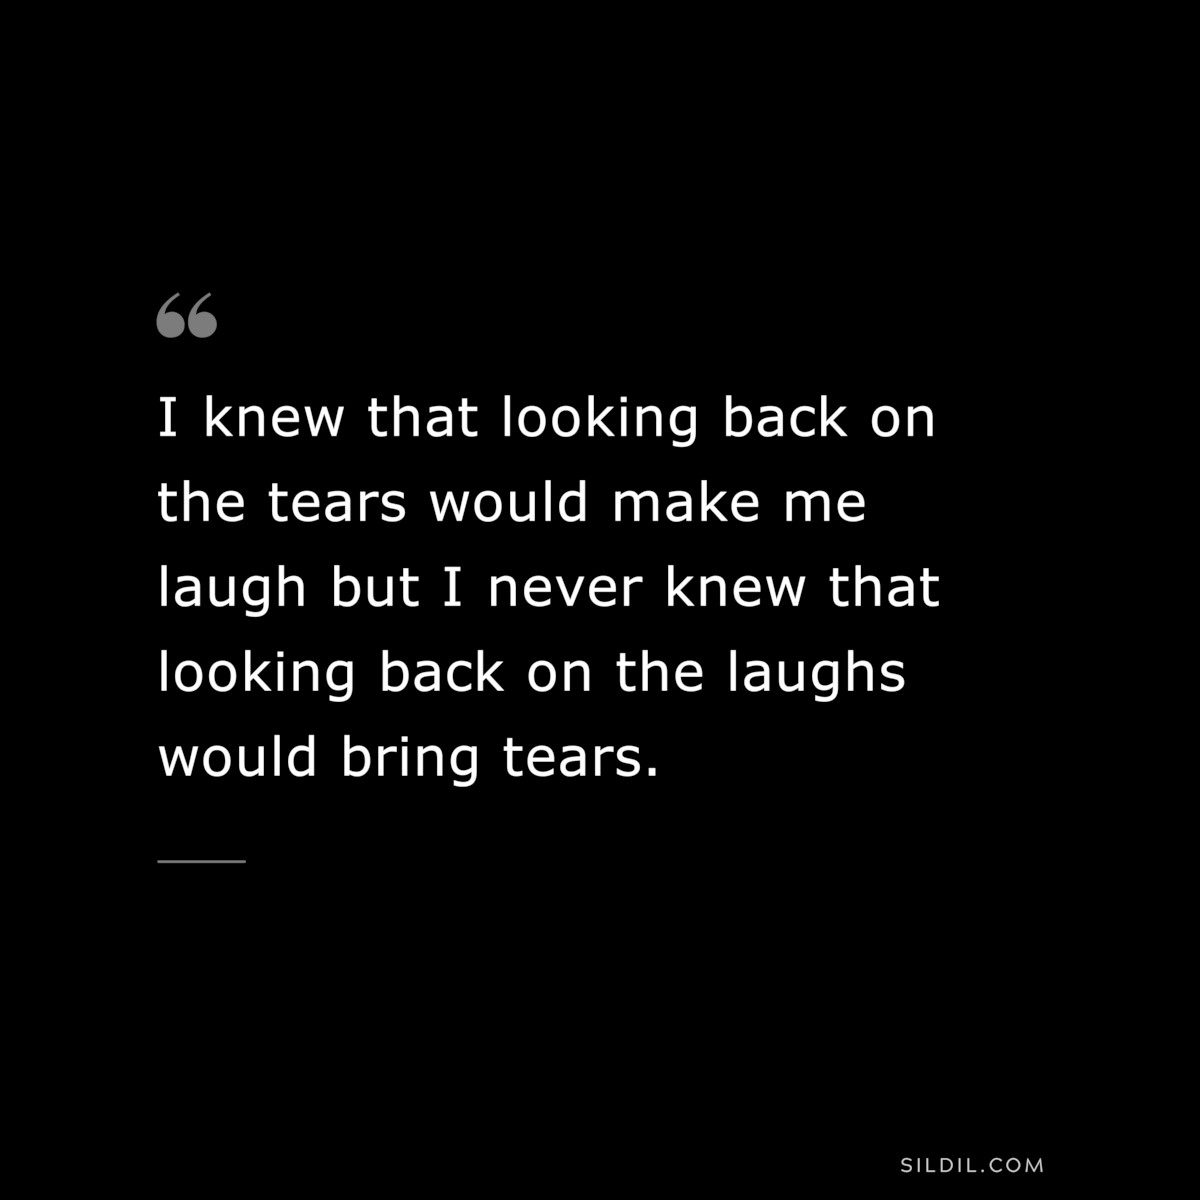 I knew that looking back on the tears would make me laugh but I never knew that looking back on the laughs would bring tears.